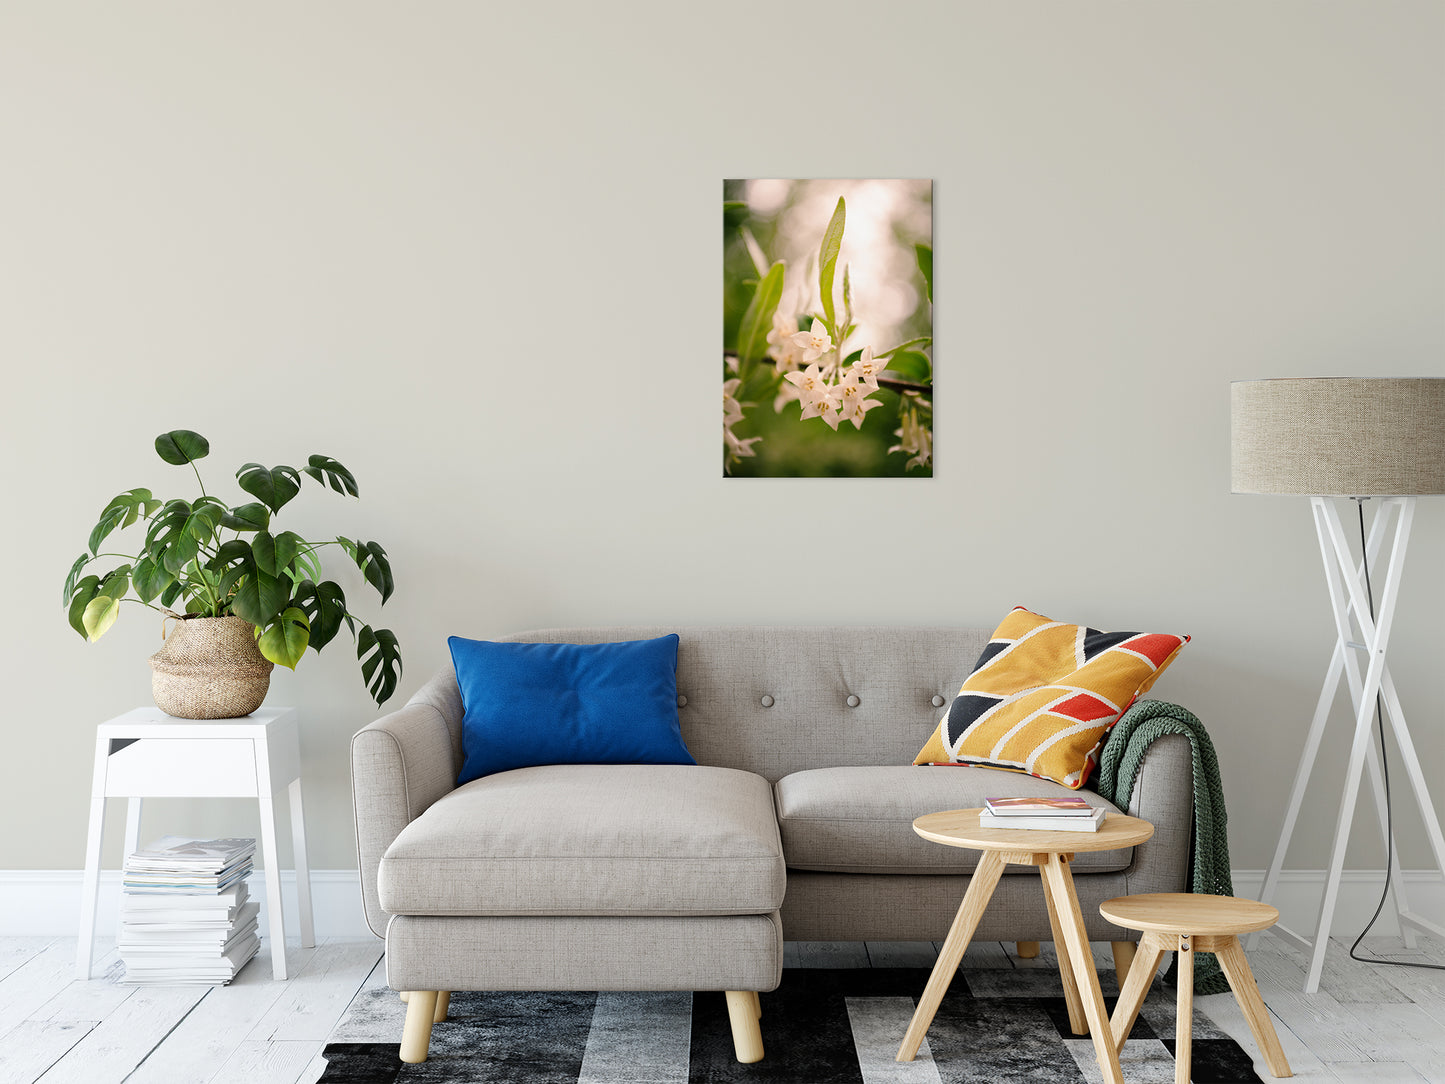 Floral Tranquility Nature / Floral Photo Fine Art Canvas Wall Art Prints 20" x 30" - PIPAFINEART